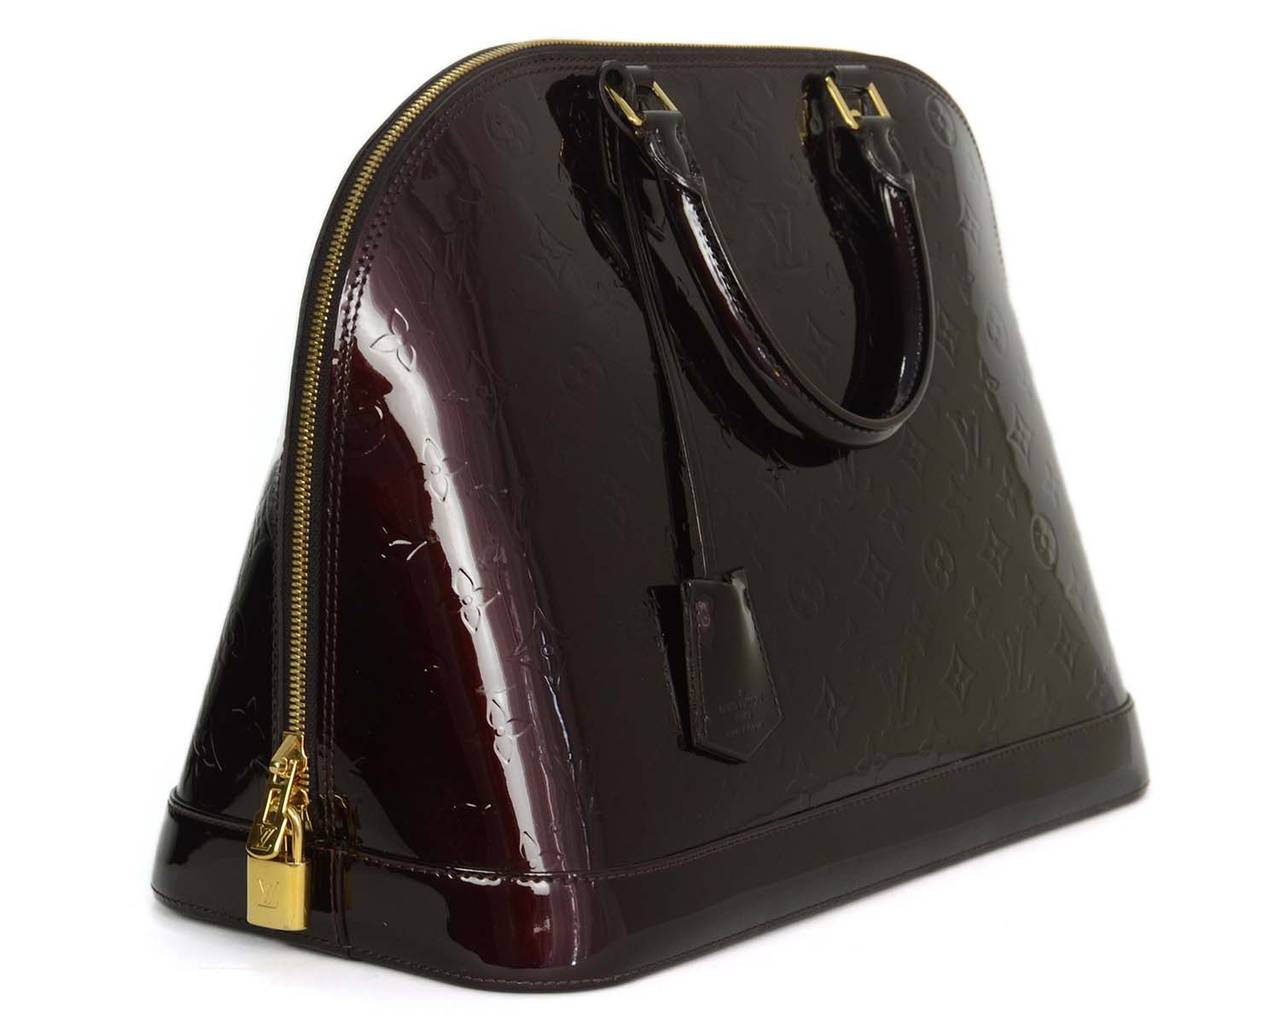 Louis Vuitton Amarante Monogram Vernis Alma GM Tote
Made in: France
Year of Production: 2010
Color: Burgundy and goldtone
Hardware: Goldtone
Materials: Vernis leather and metal
Lining: Brown textile
Closure/opening: Double zip around